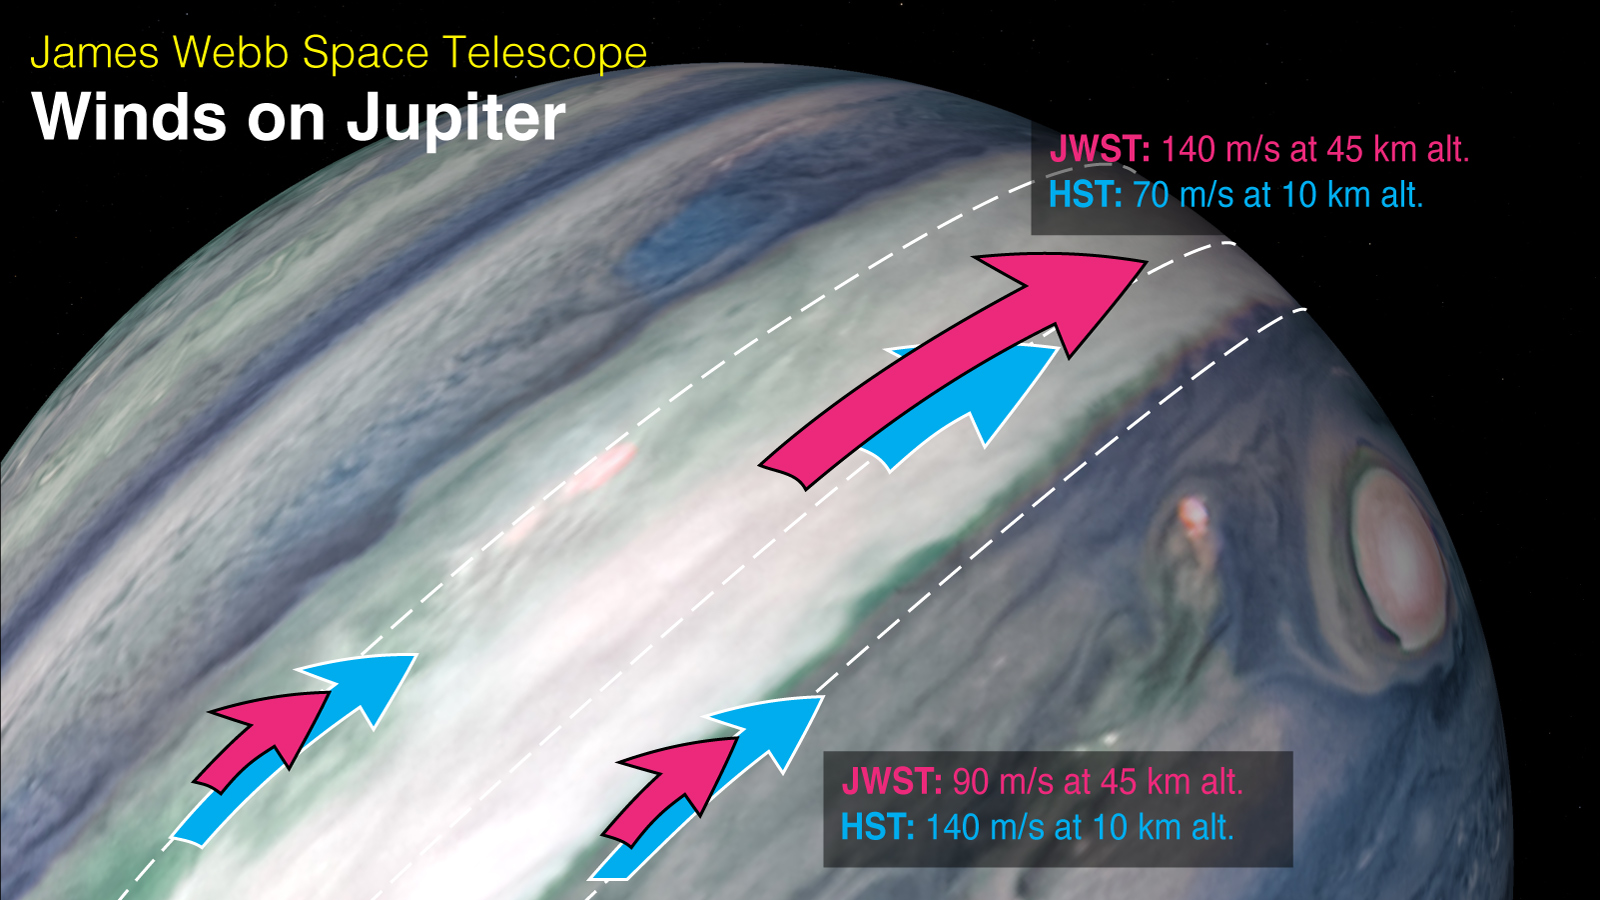 image of jupiter and the wind directions on it